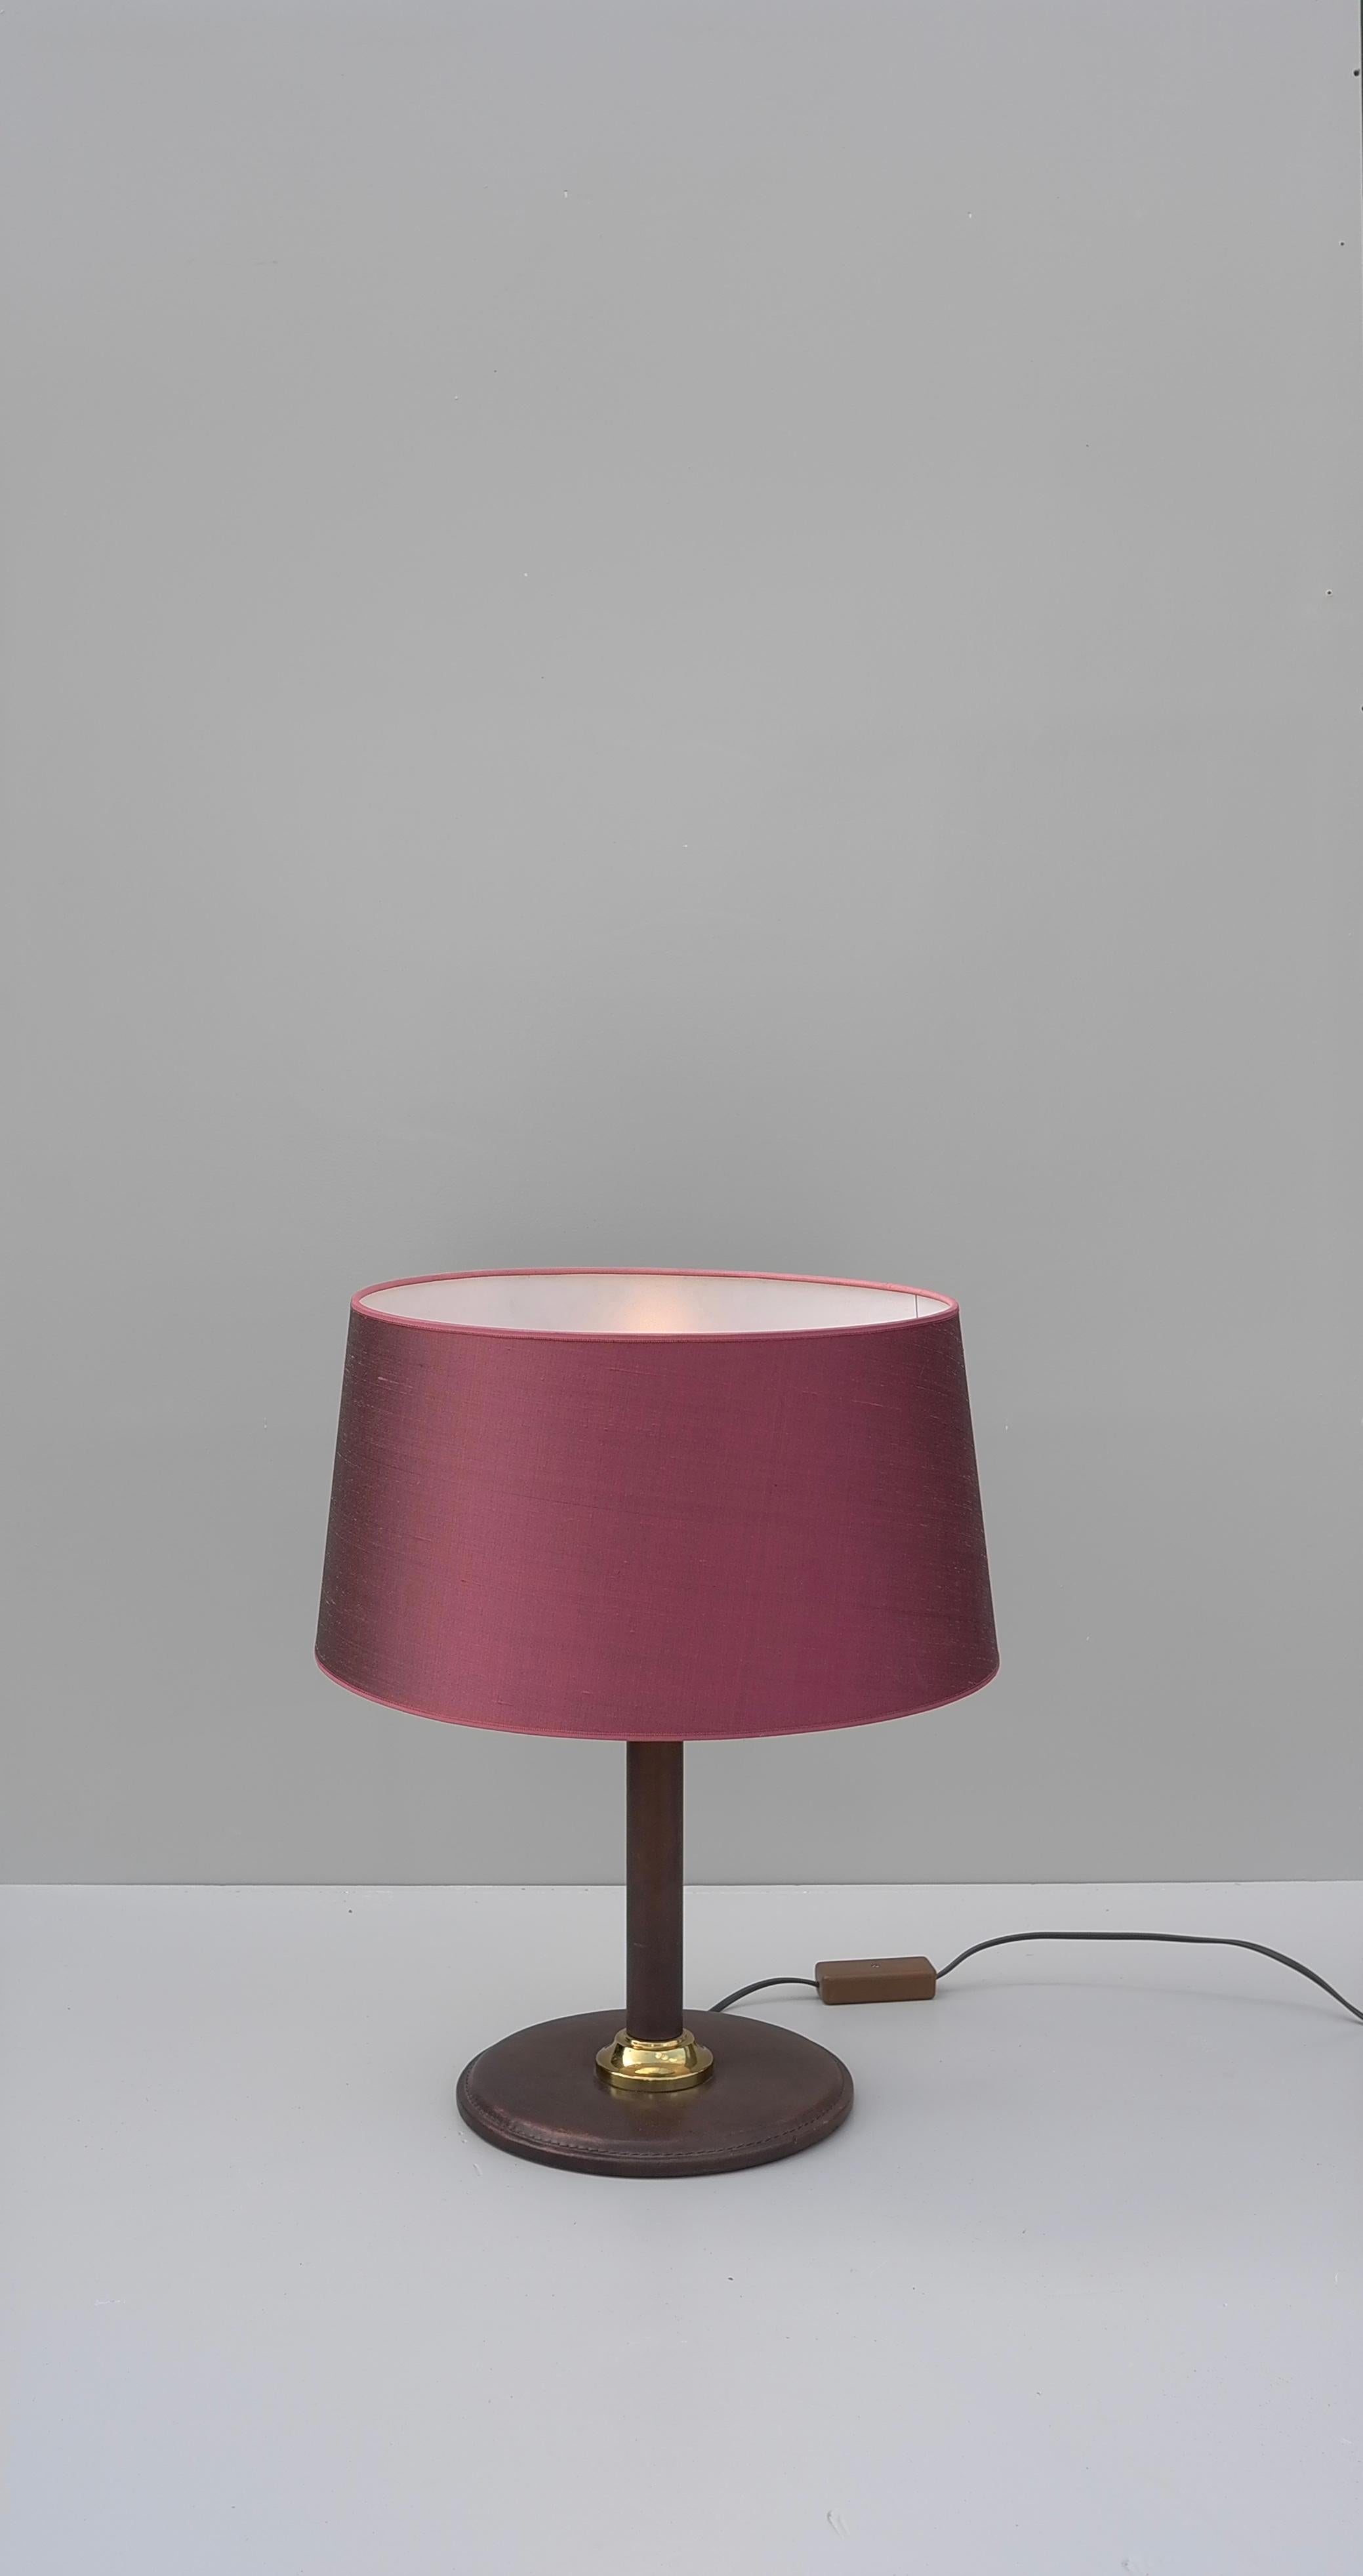 Hand-stitched brown leather table lamp with silk deep pinks shade, France, 1960s.